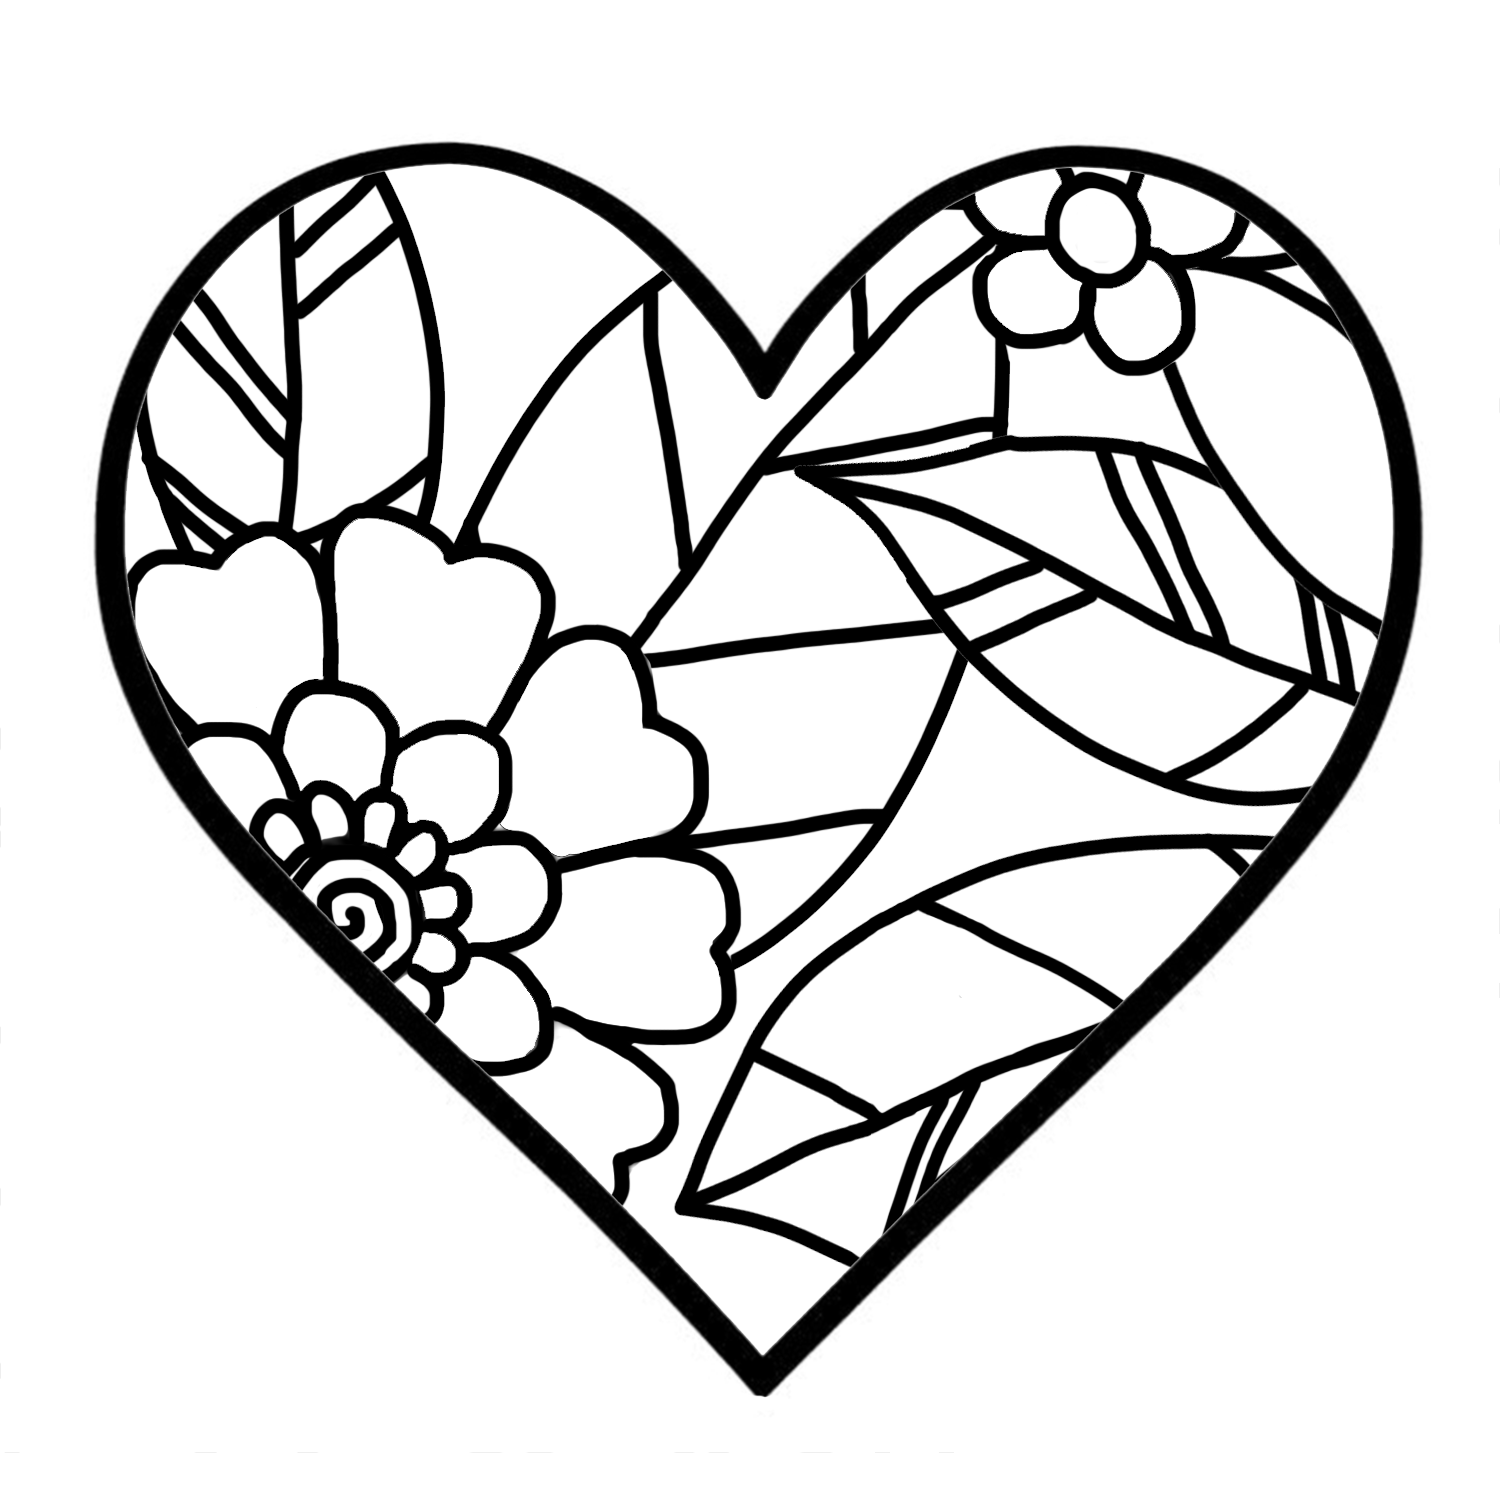 Heart Coloring Pages - FREE Download - Underbart skapad